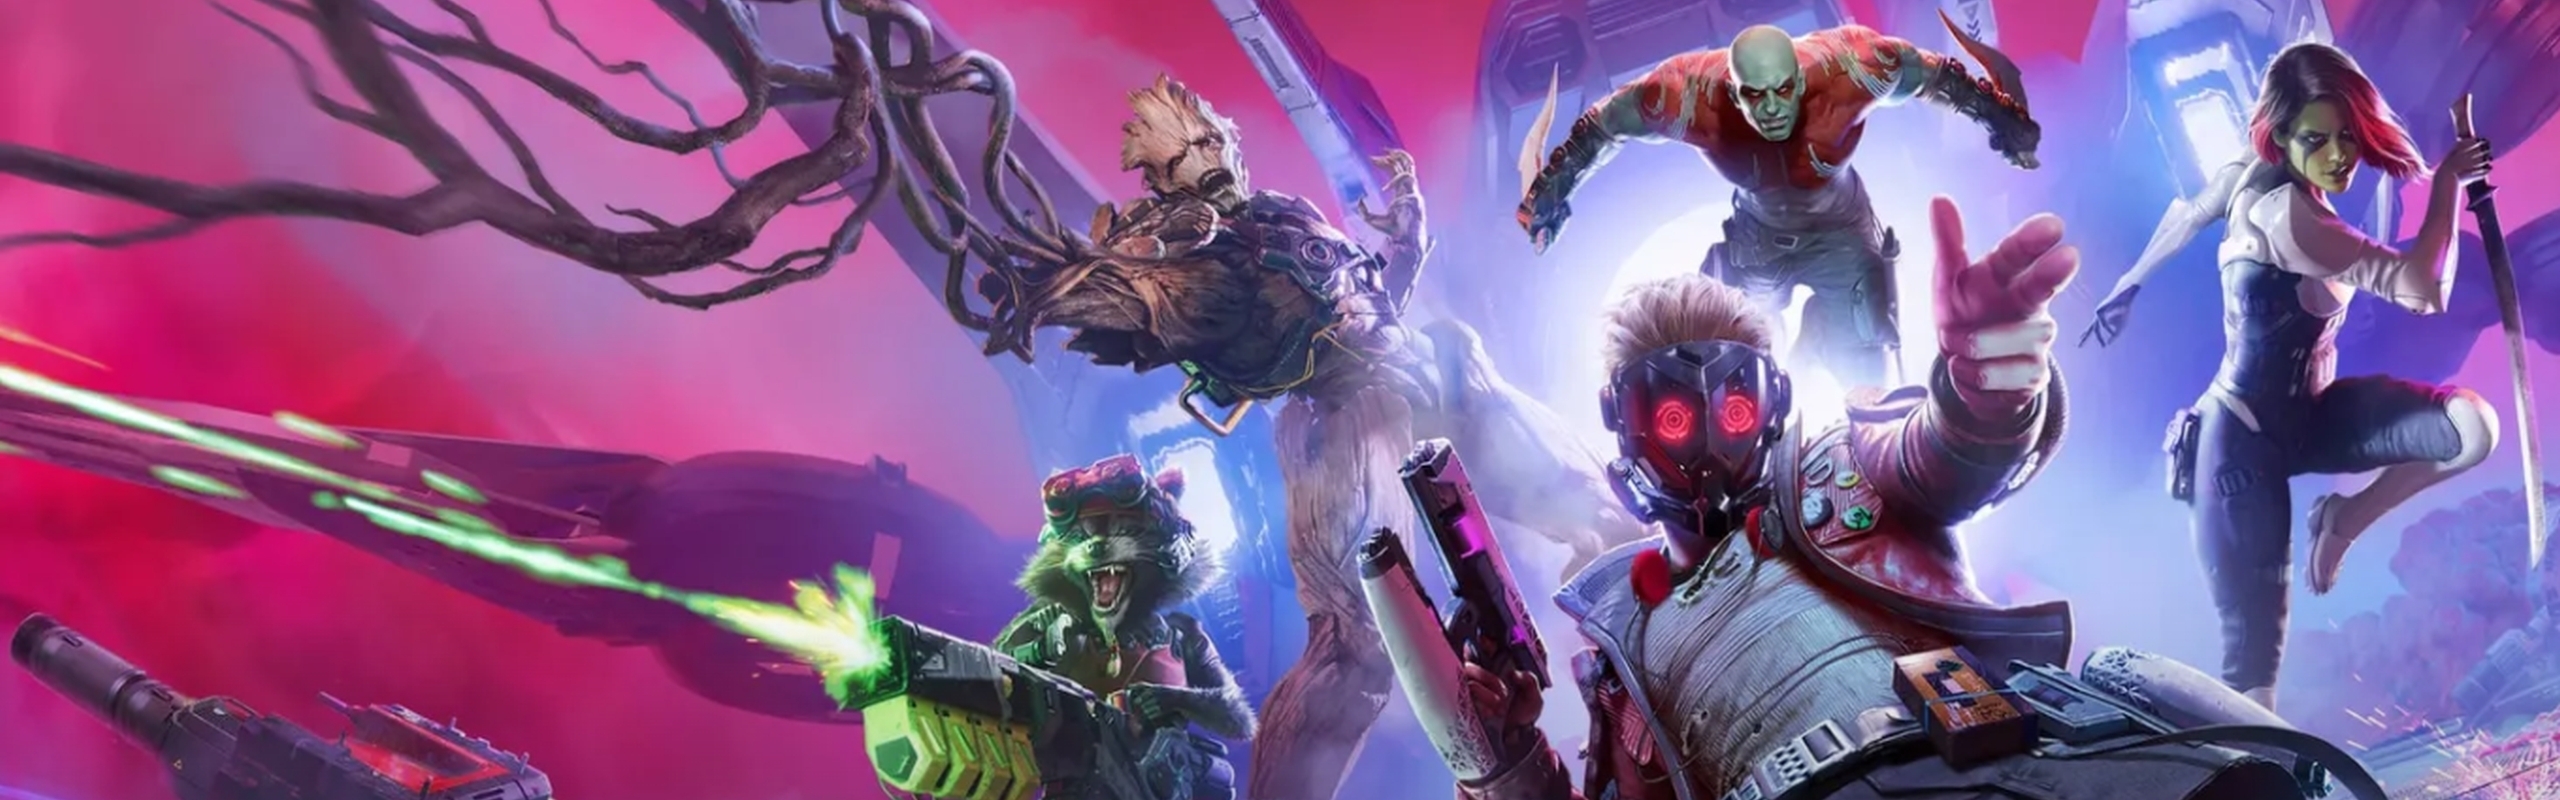 Marvel’s Guardians of the Galaxy review – based on the 2008 comic series